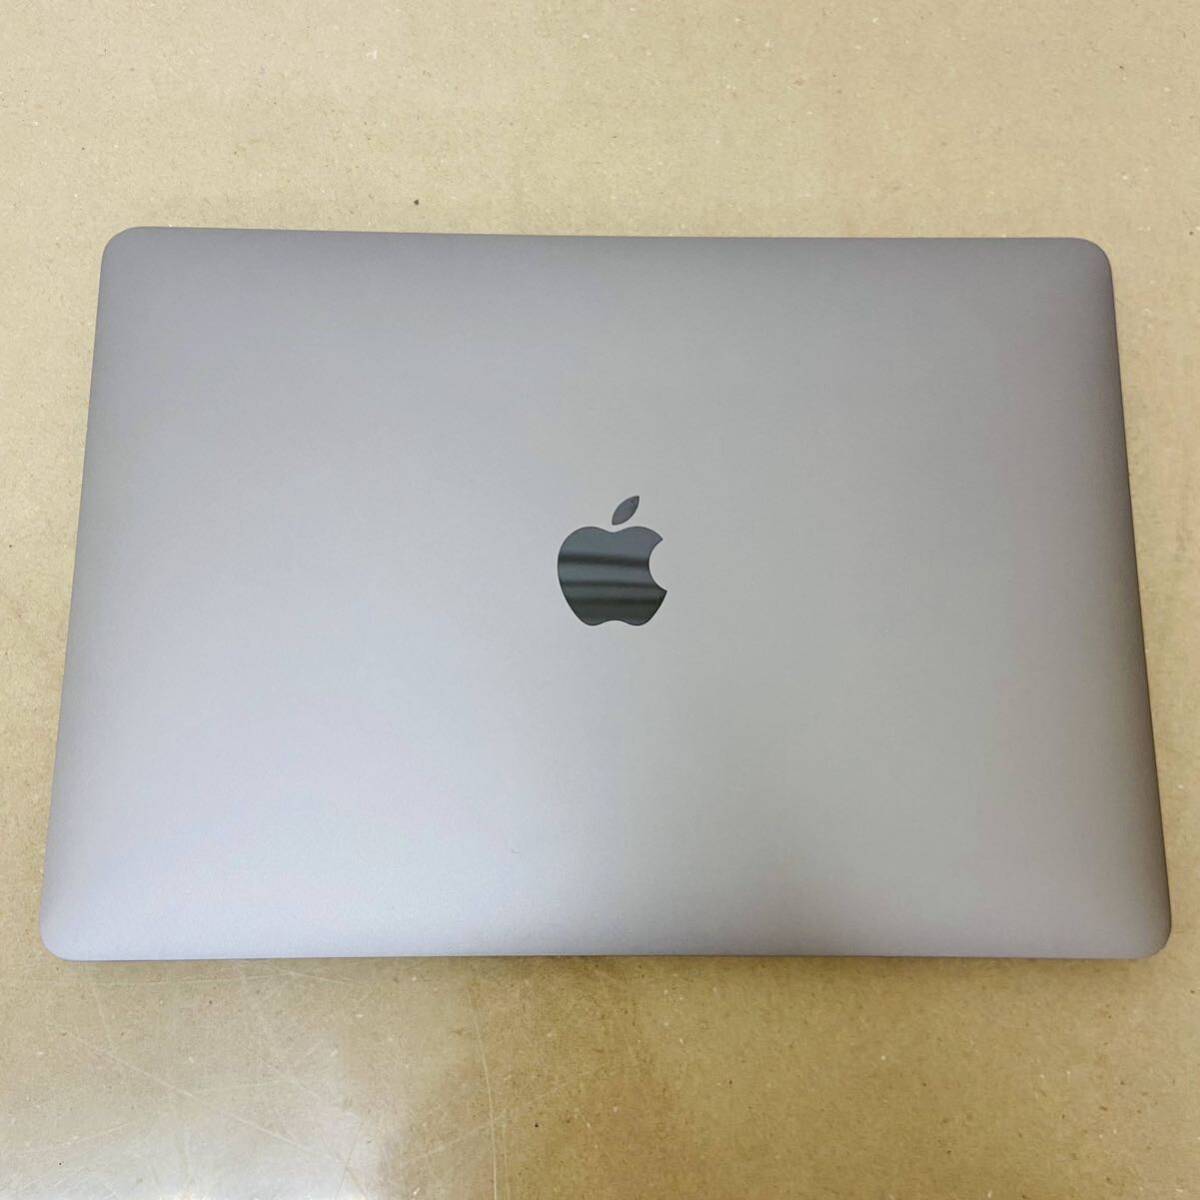 MacBook Pro 13-inch 2018 2.3GHz Quad core Core i5 16GB SSD 512GB. discharge number of times 144 with charger .i17963 80 size shipping 